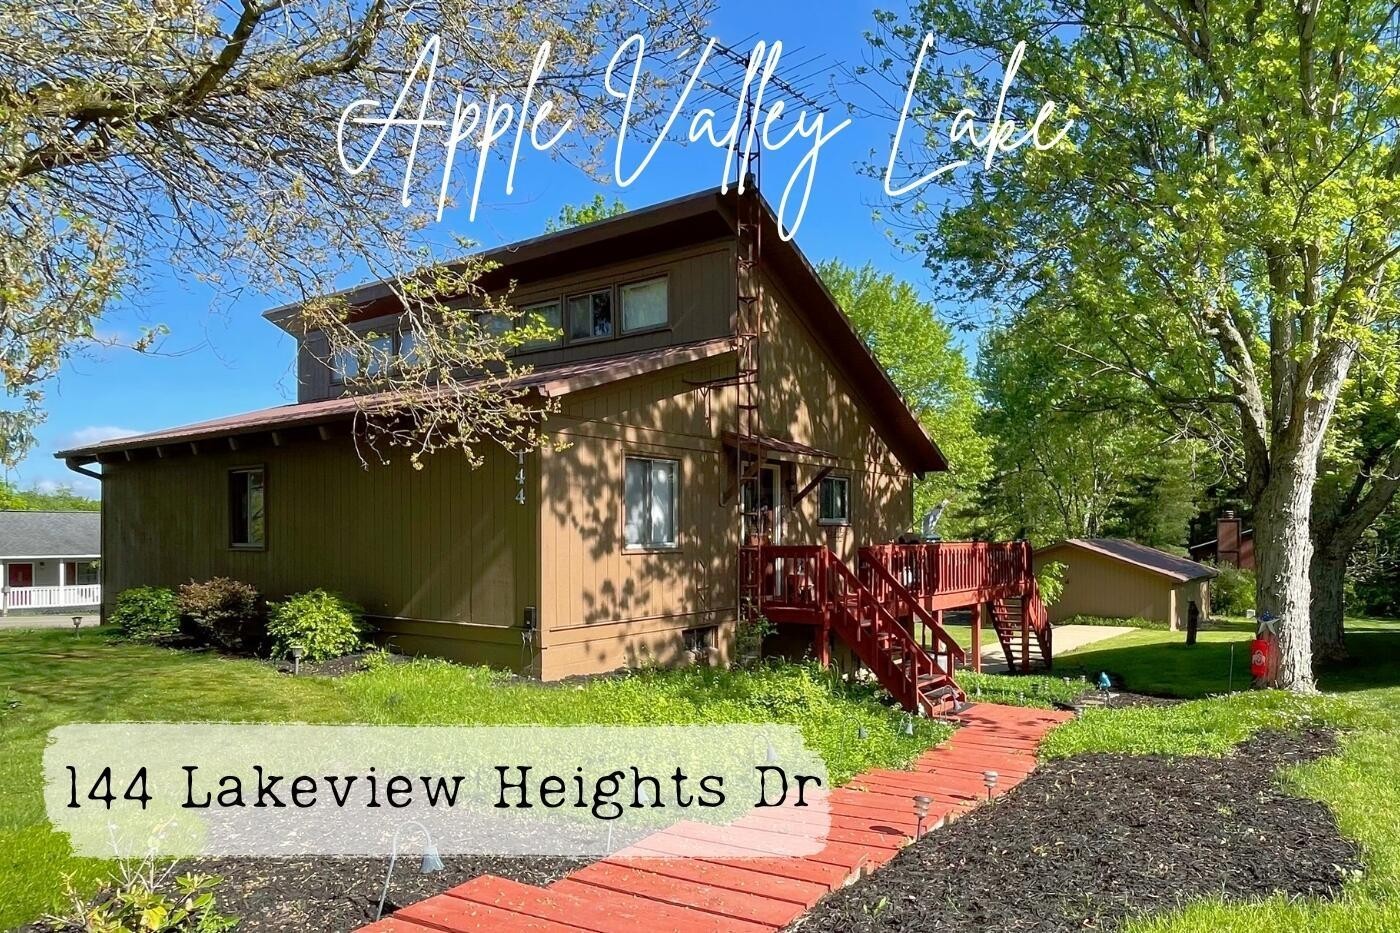 1. 144 Lakeview Heights Drive